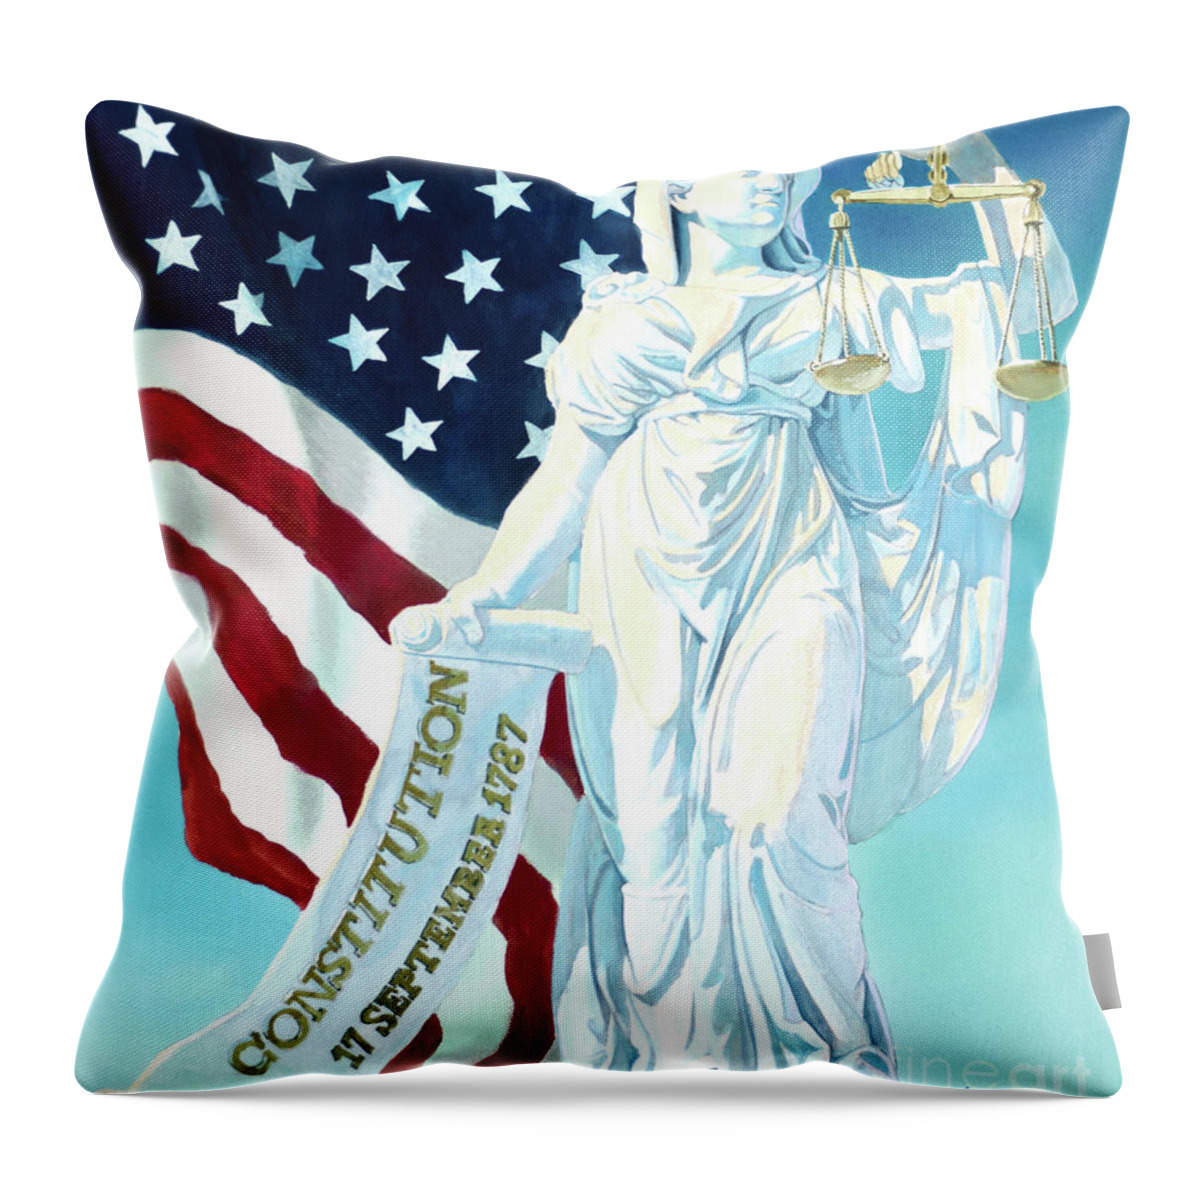 Tom Lydon Throw Pillow featuring the painting America - Genius of America - Justice Holding Scale And Scrolls by Tom Lydon